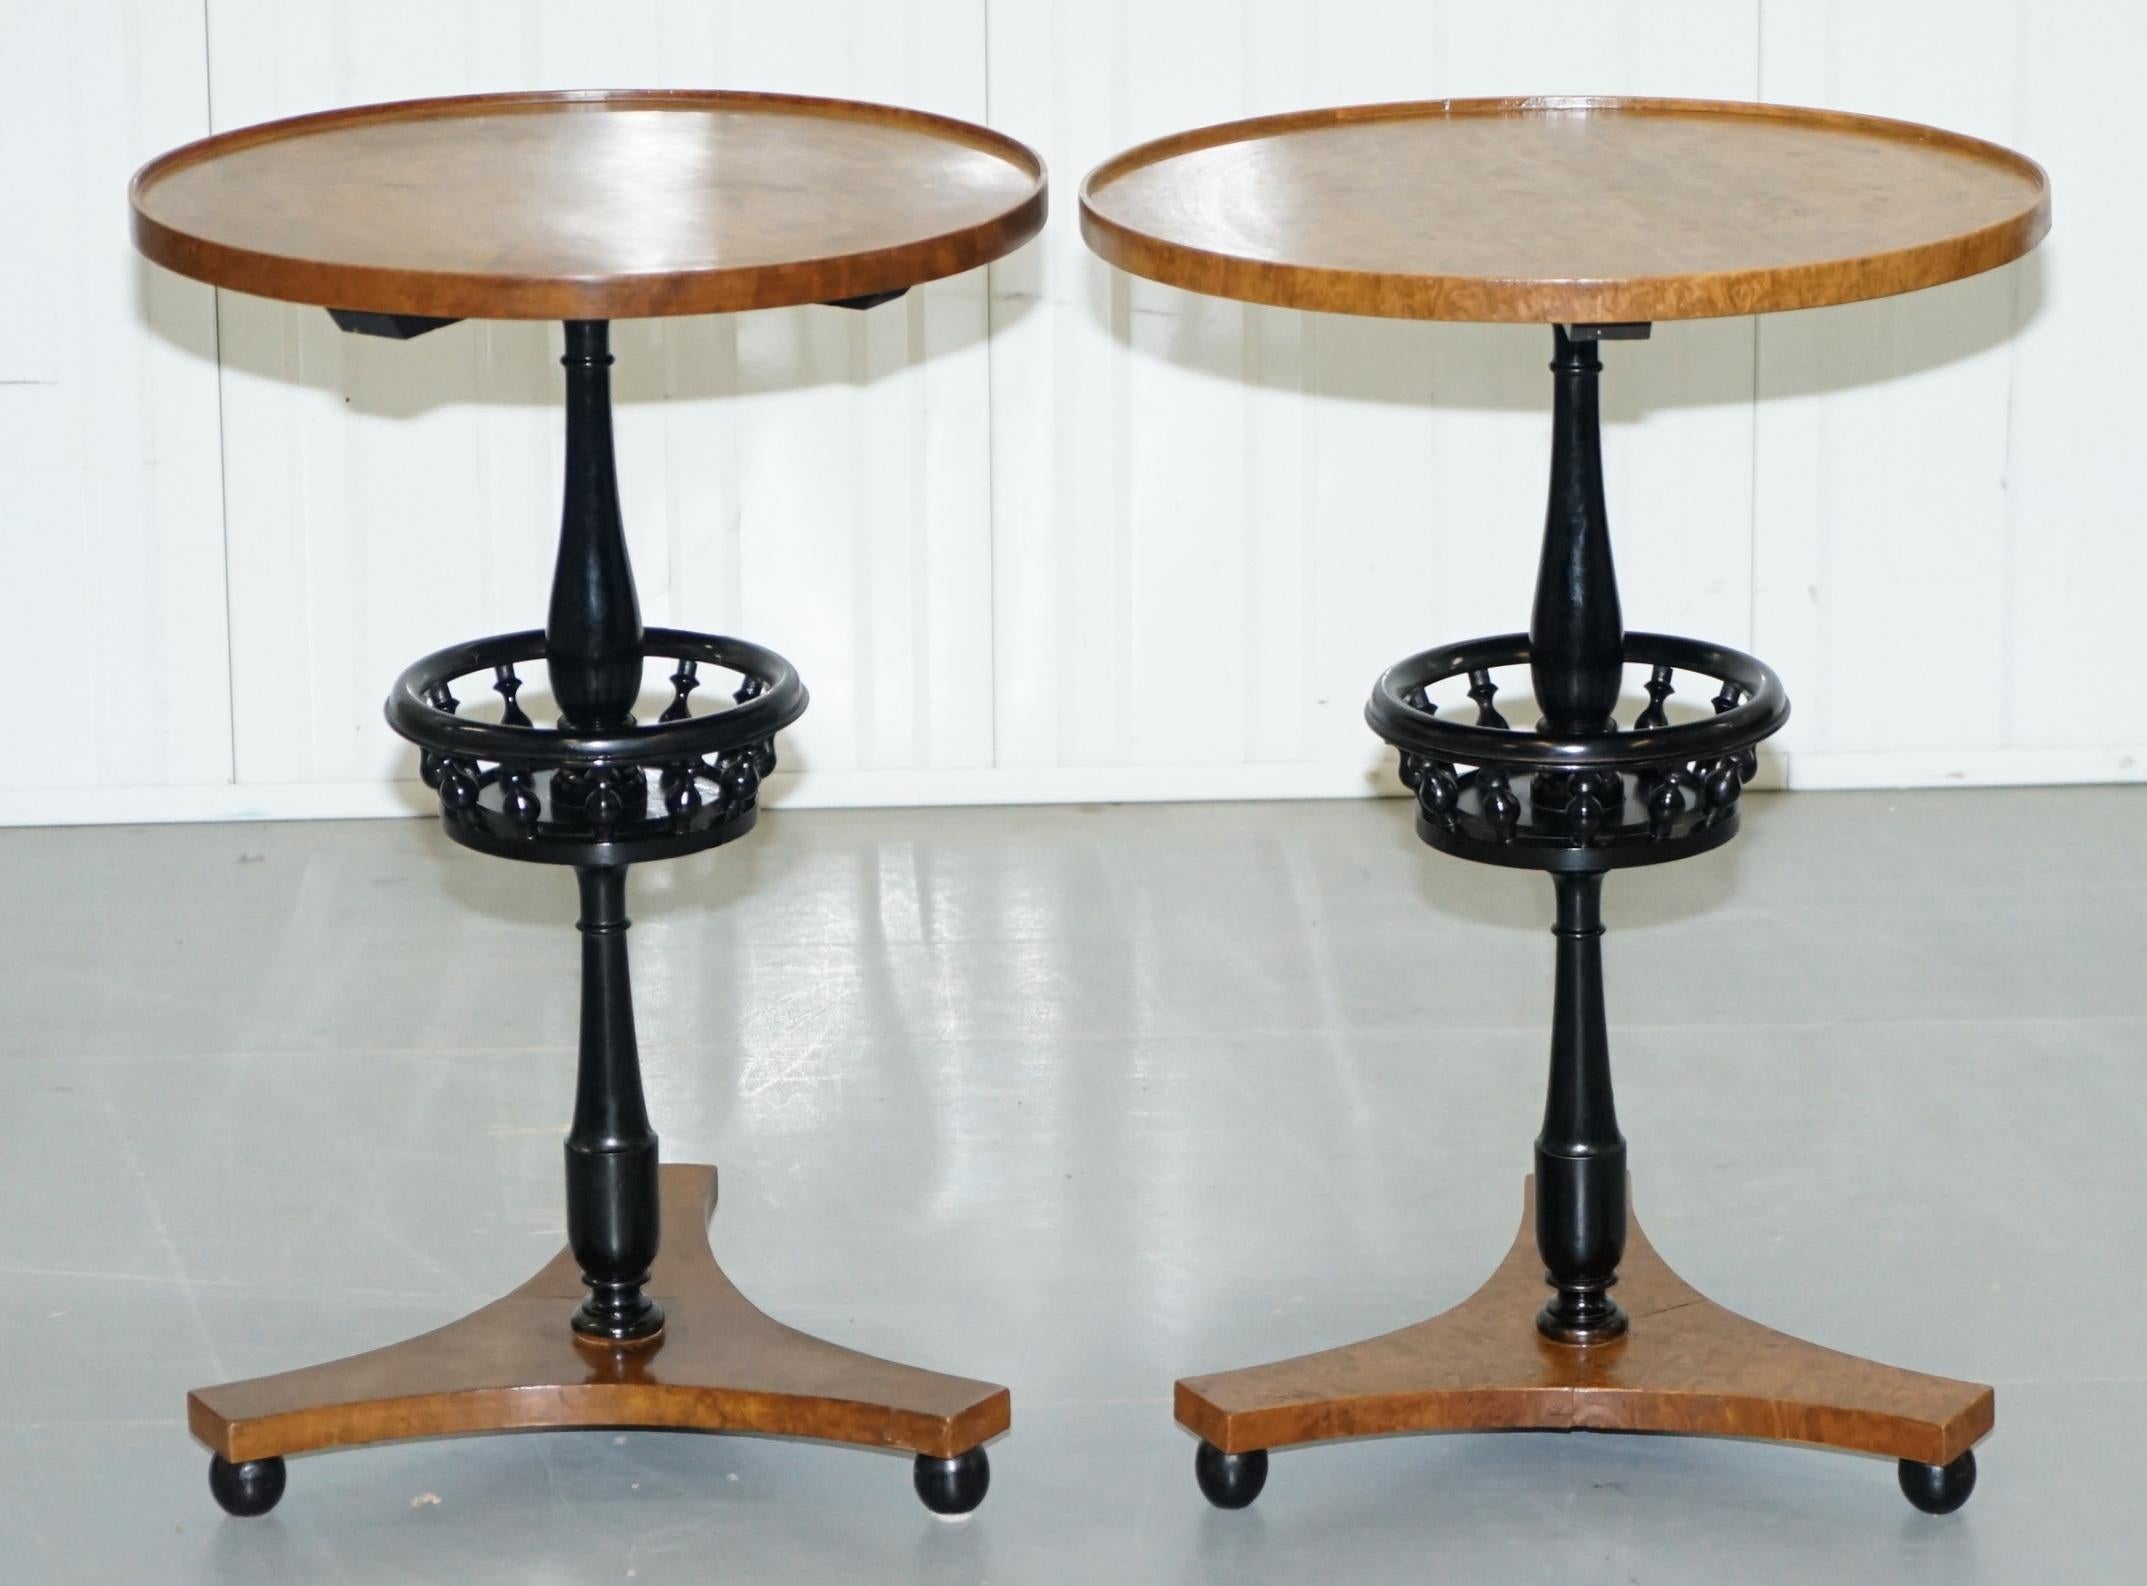 We are delighted to offer for sale this lovely pair vintage Biedermeier burr walnut side tables in restored condition

These tables have been restored to include having the finish stripped off, they have then been lightly French polished with a